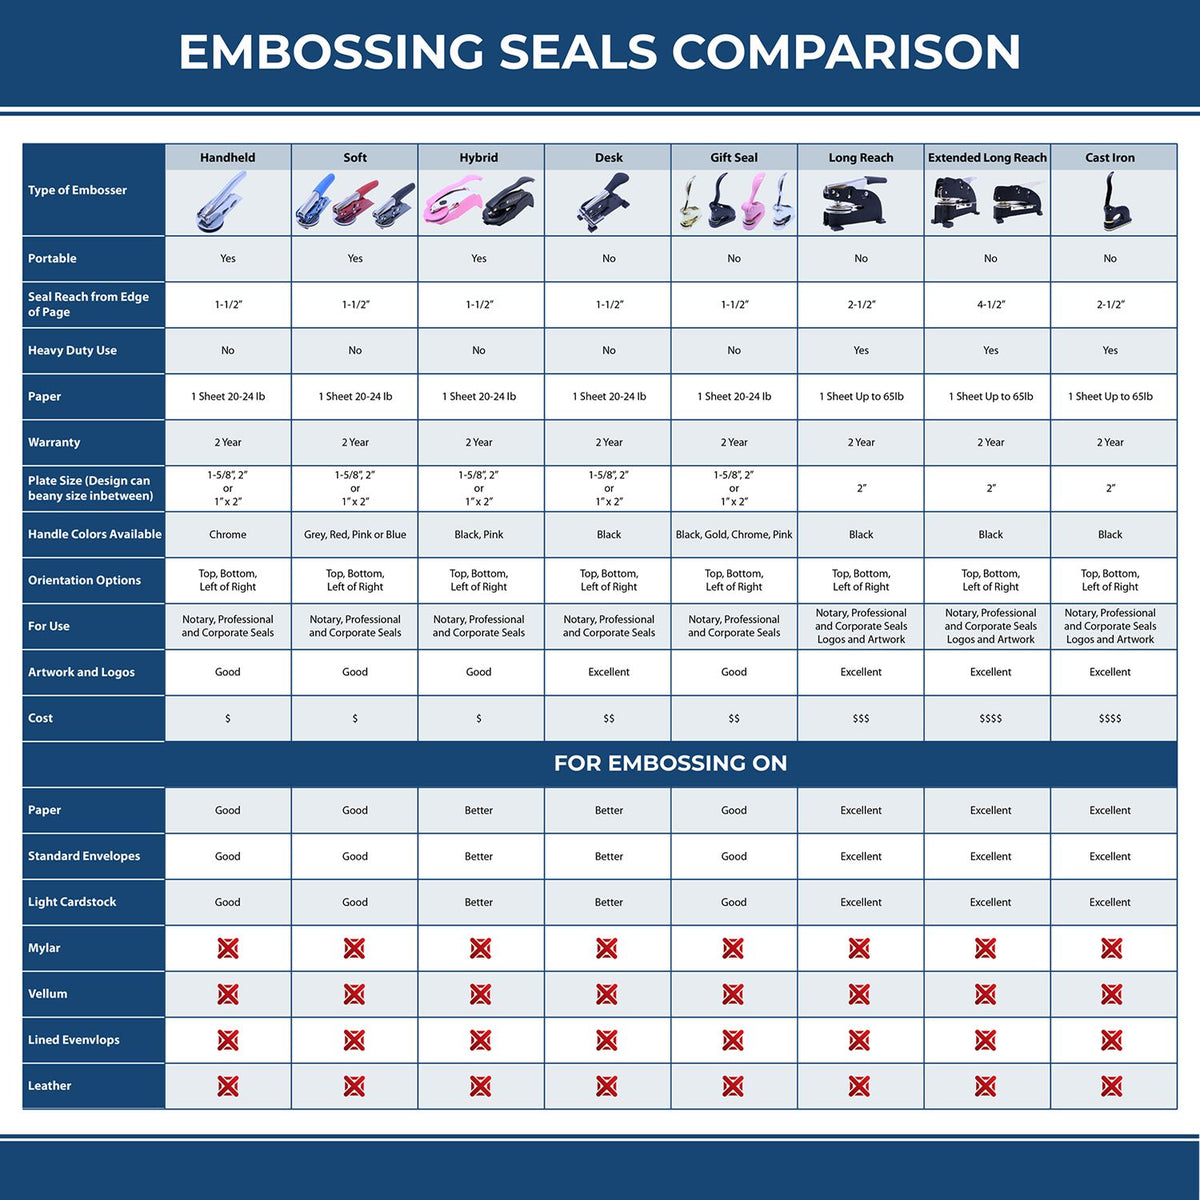 A comparison chart for the different types of mount models available for the Kansas Engineer Desk Seal.